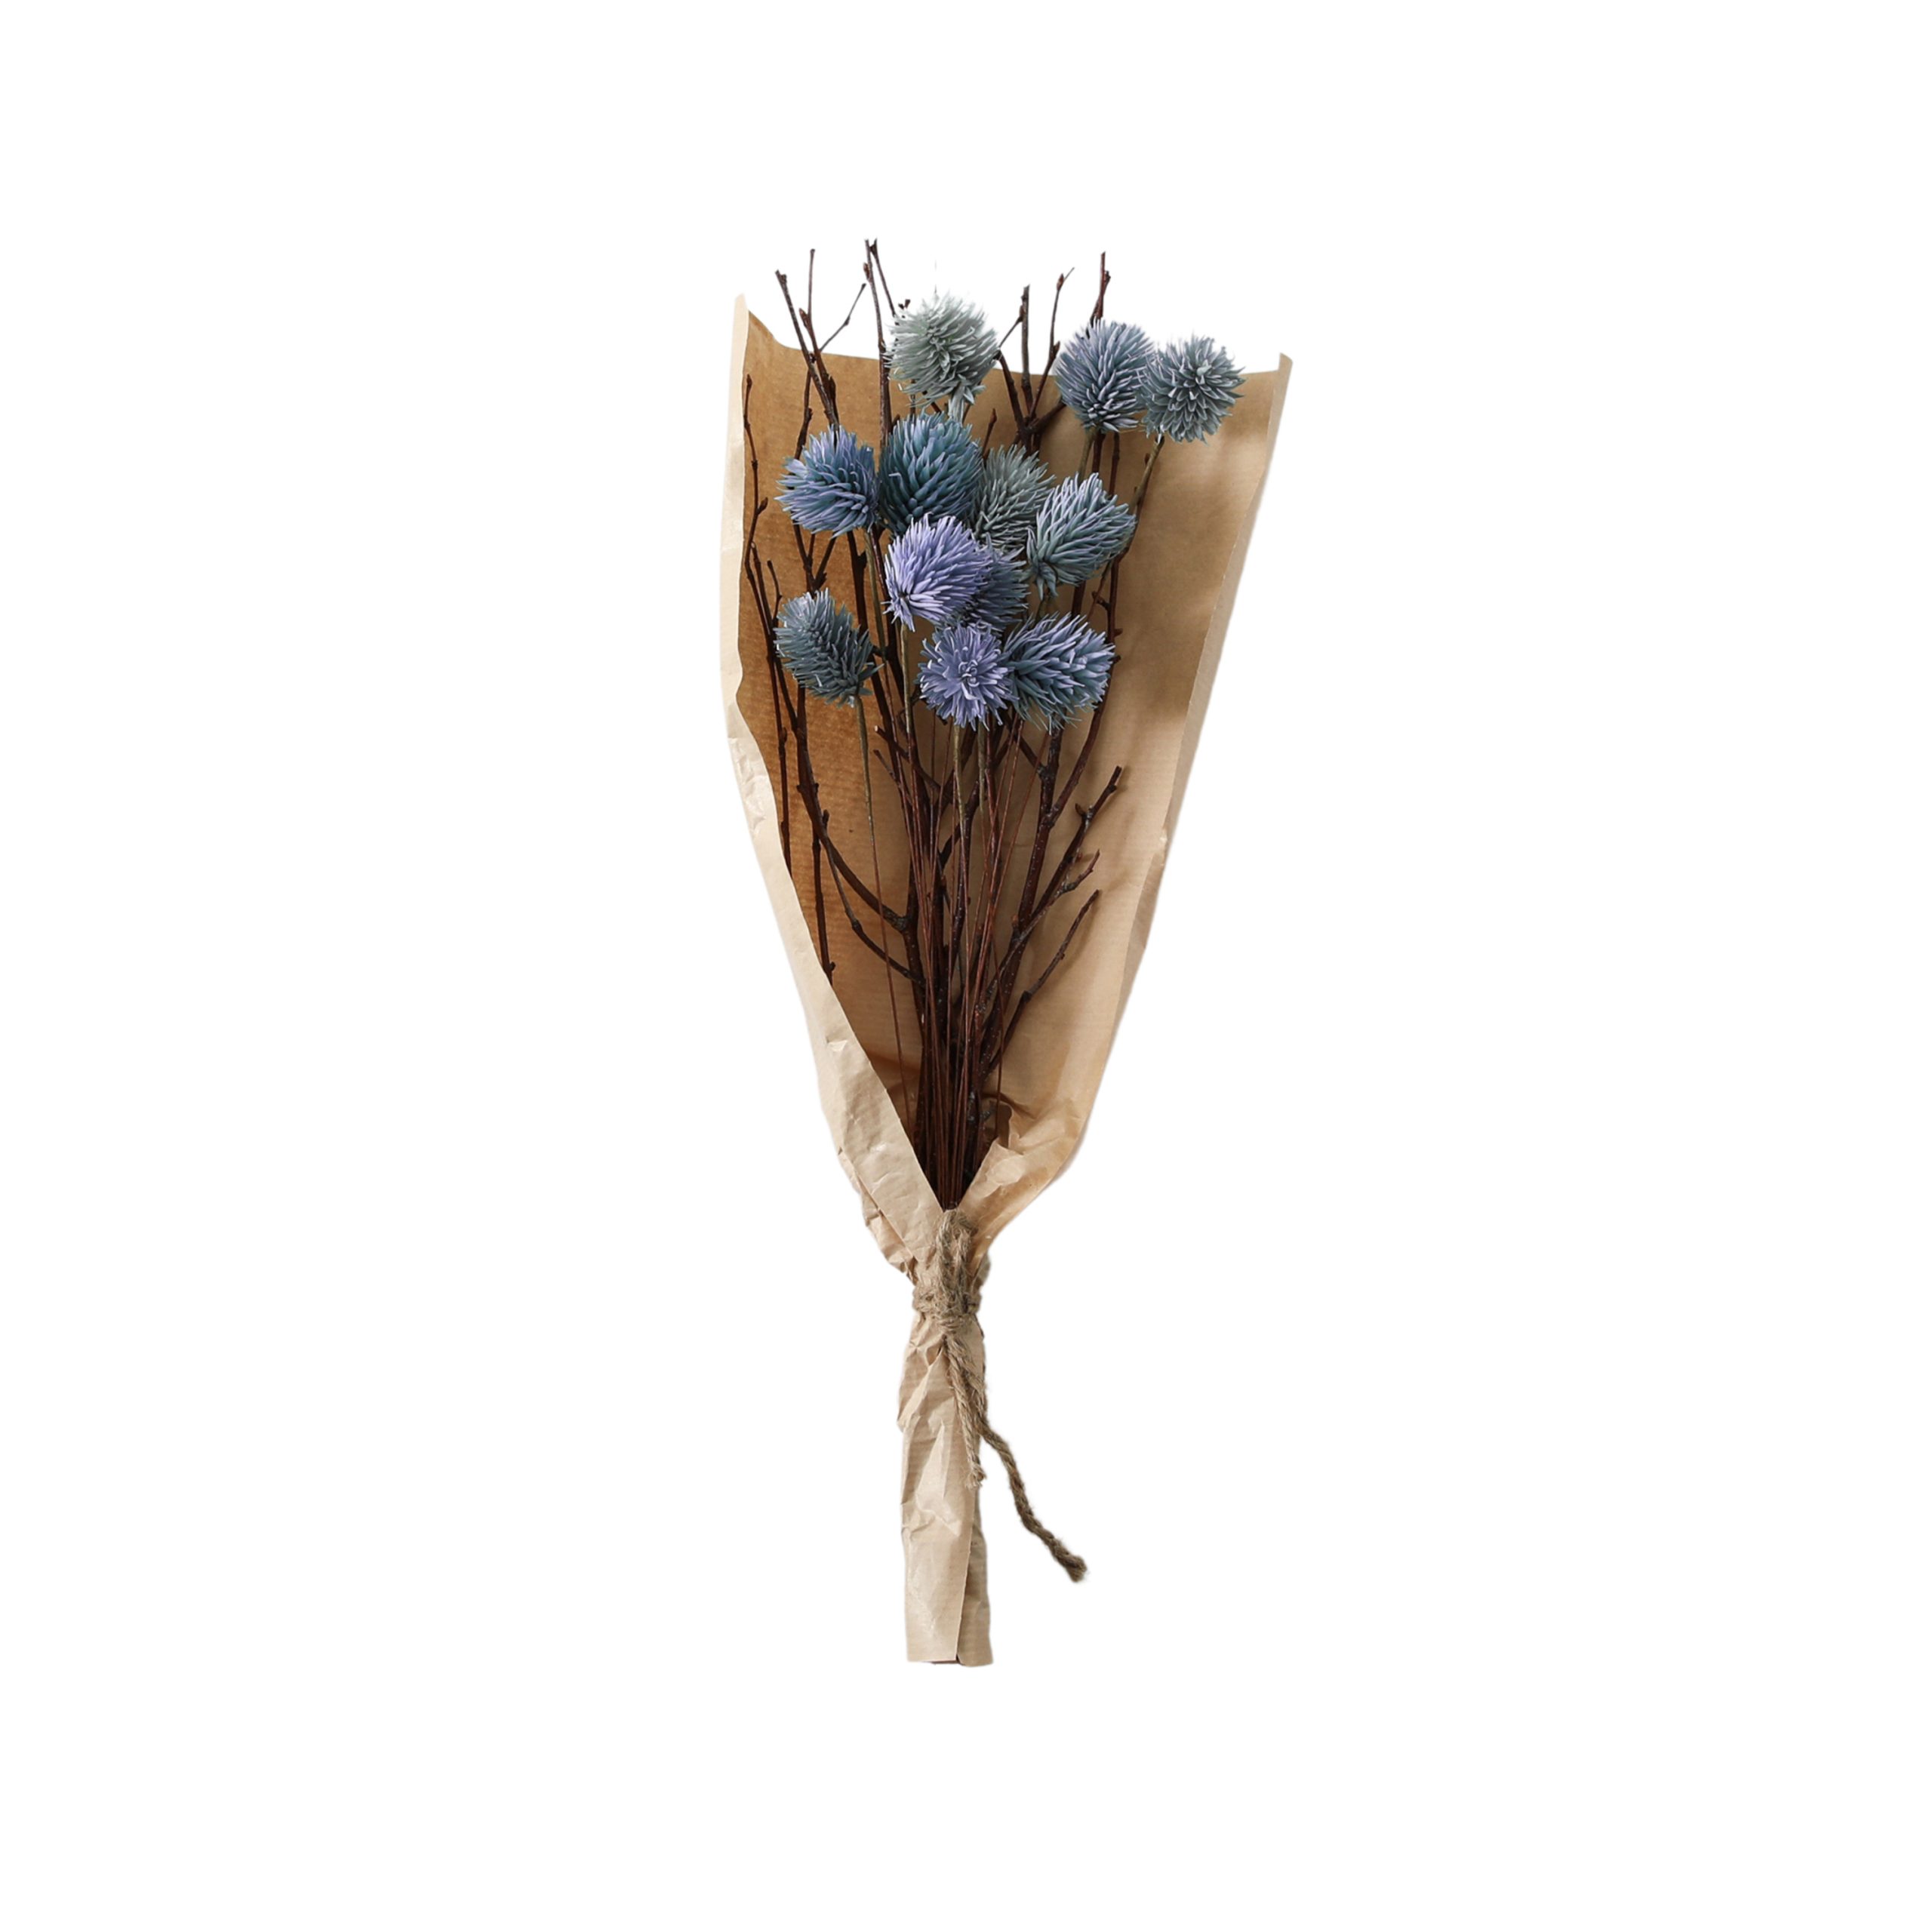 Gallery Direct Dried Thistle Bundle in Paper Wrap Blue